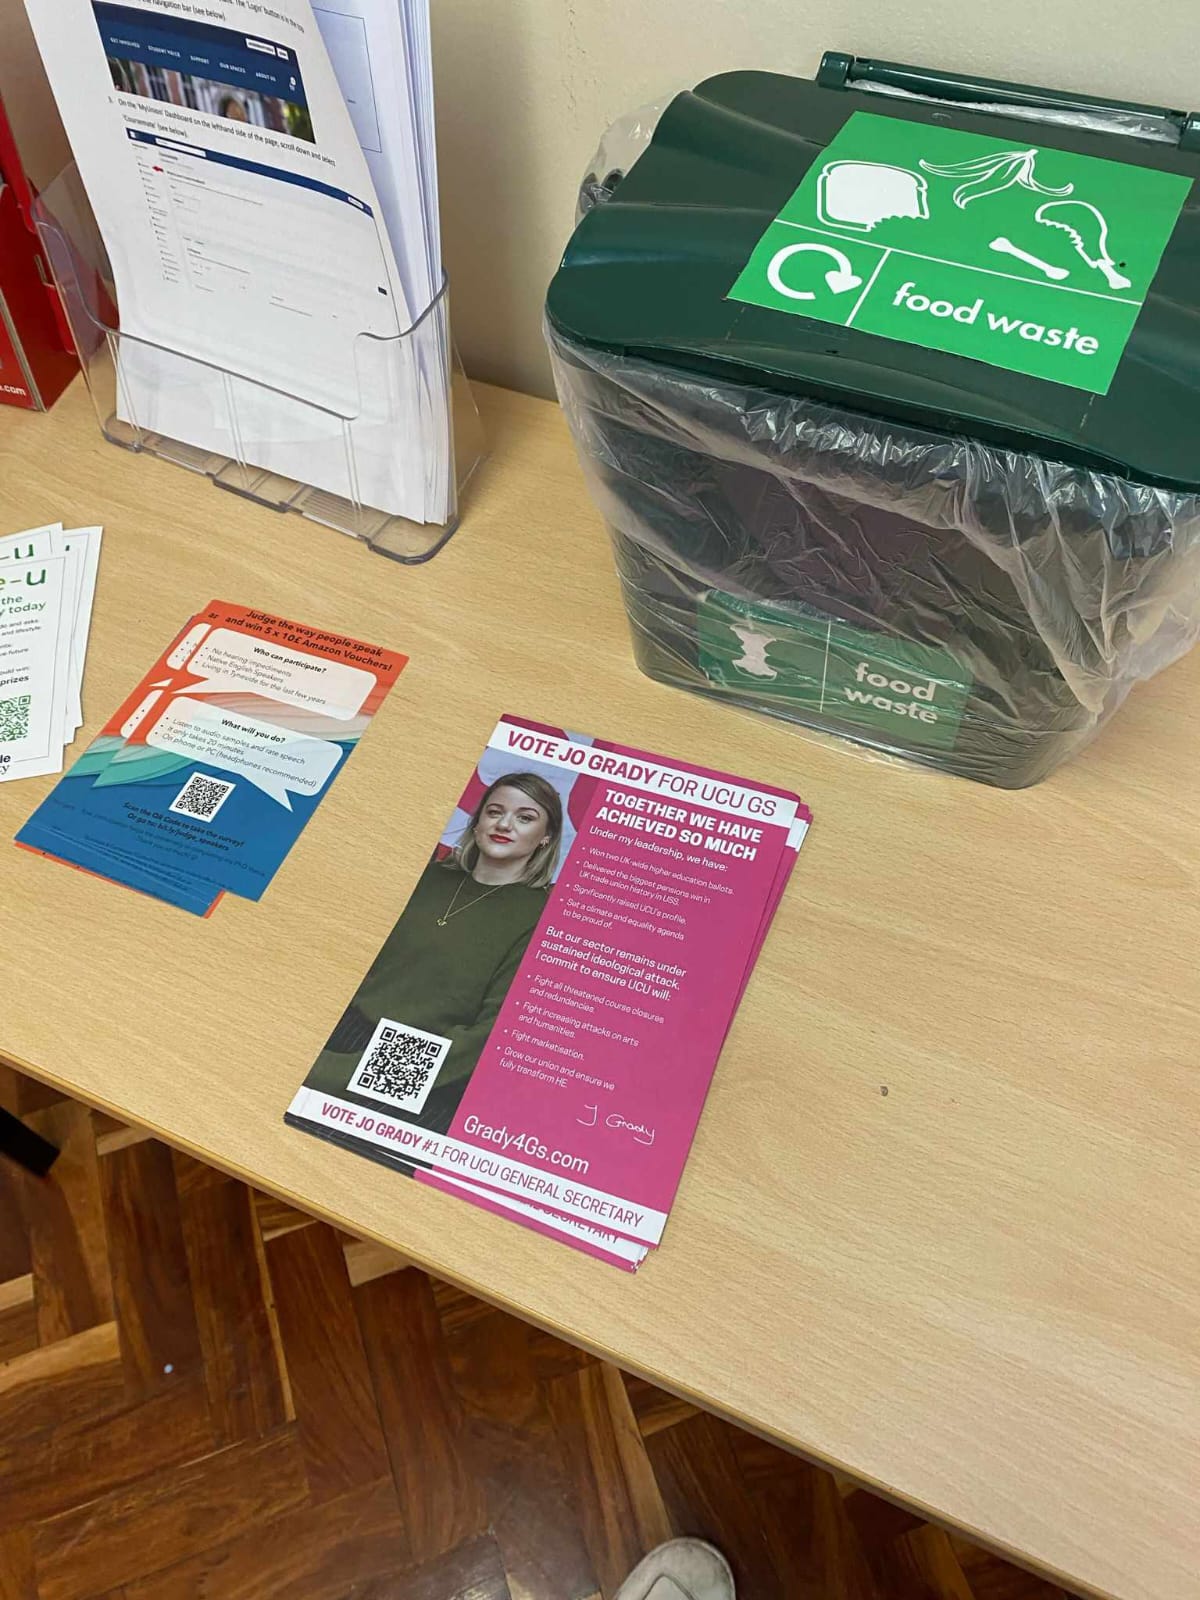 Grady4GS leaflet on a table with other leaflets